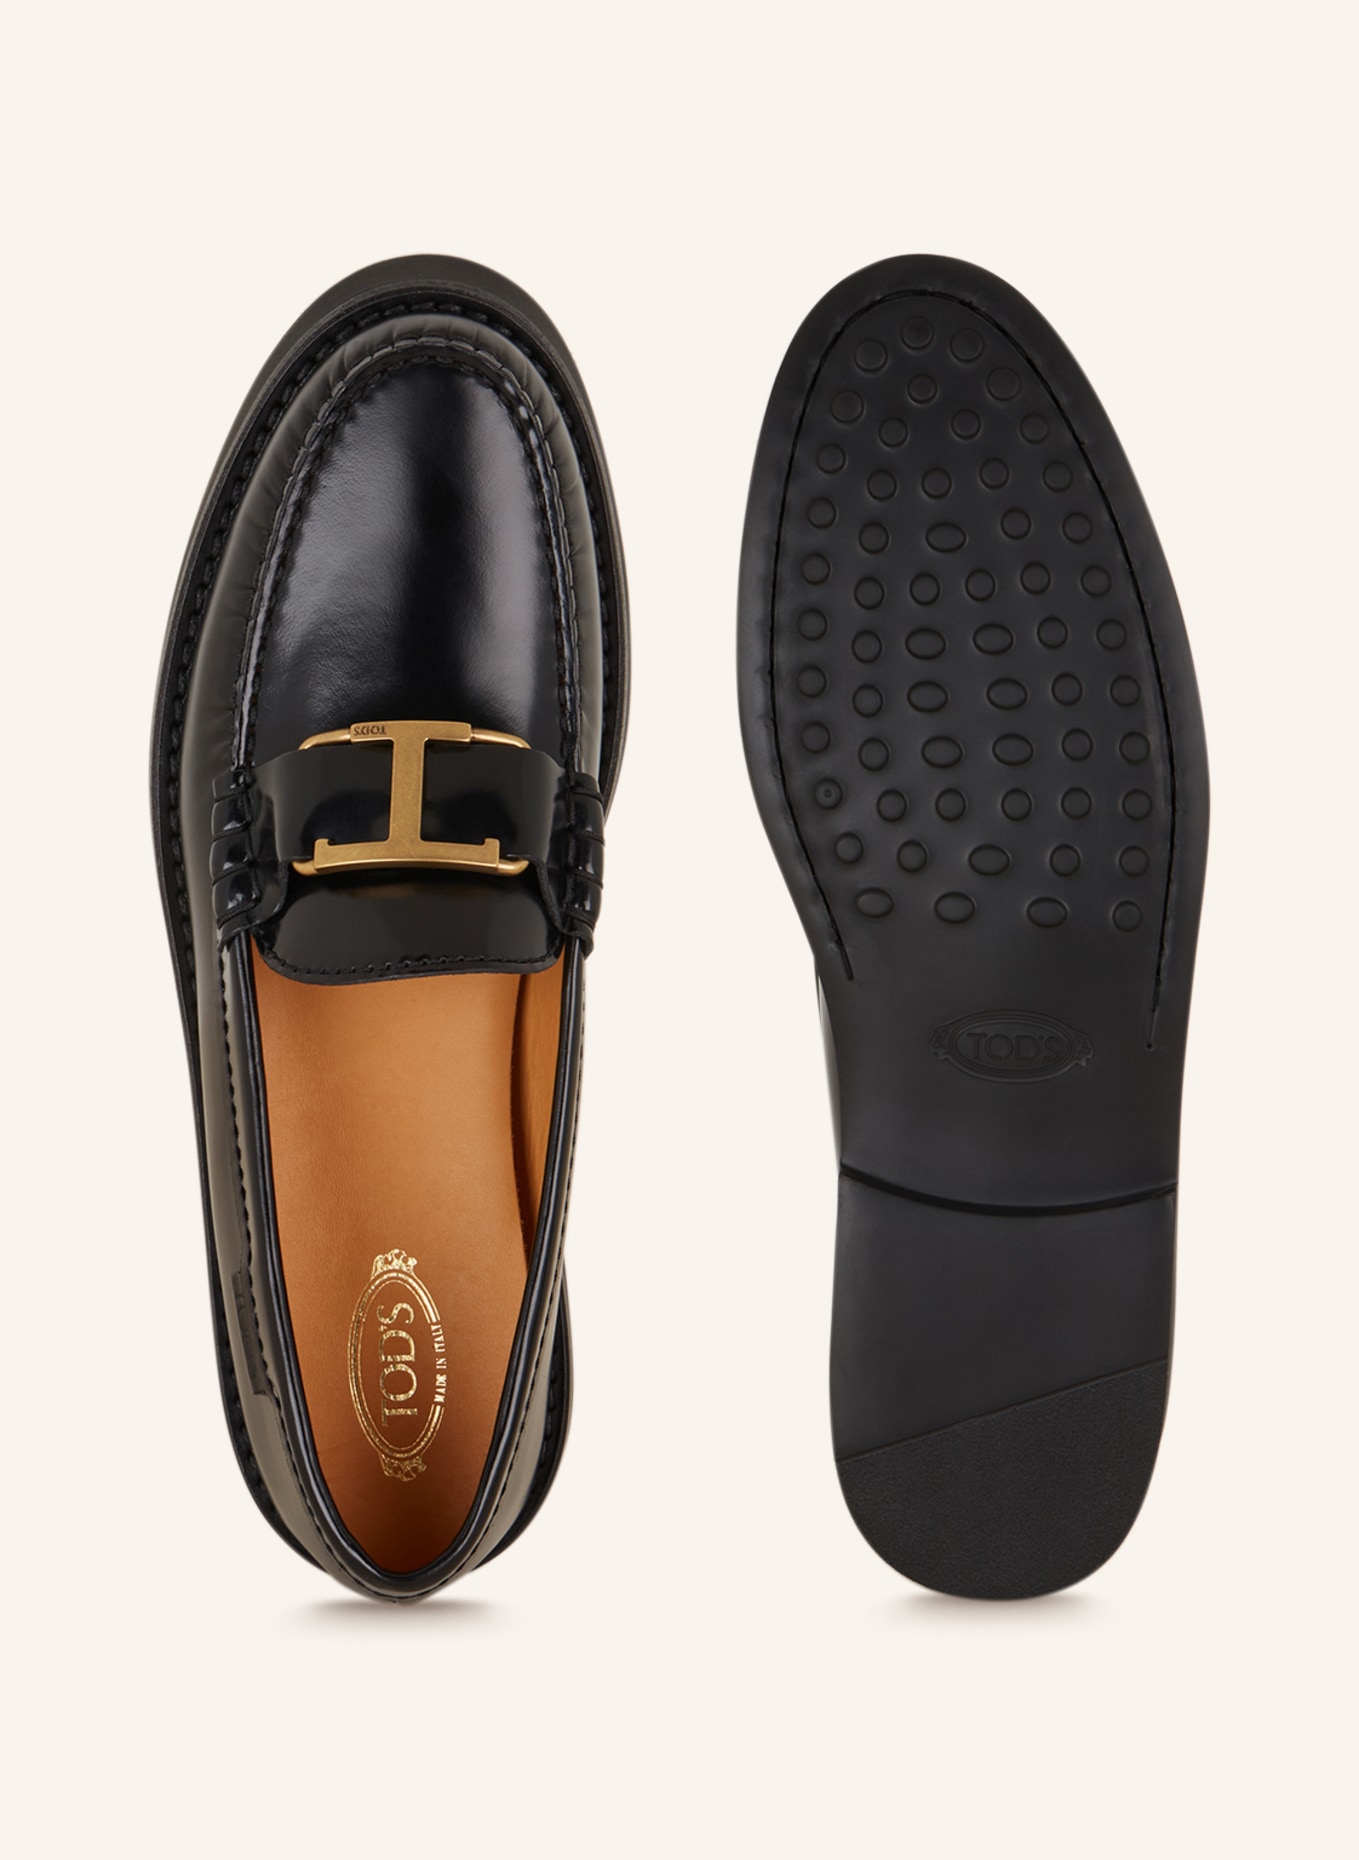 TOD'S Loafers, Color: BLACK (Image 5)